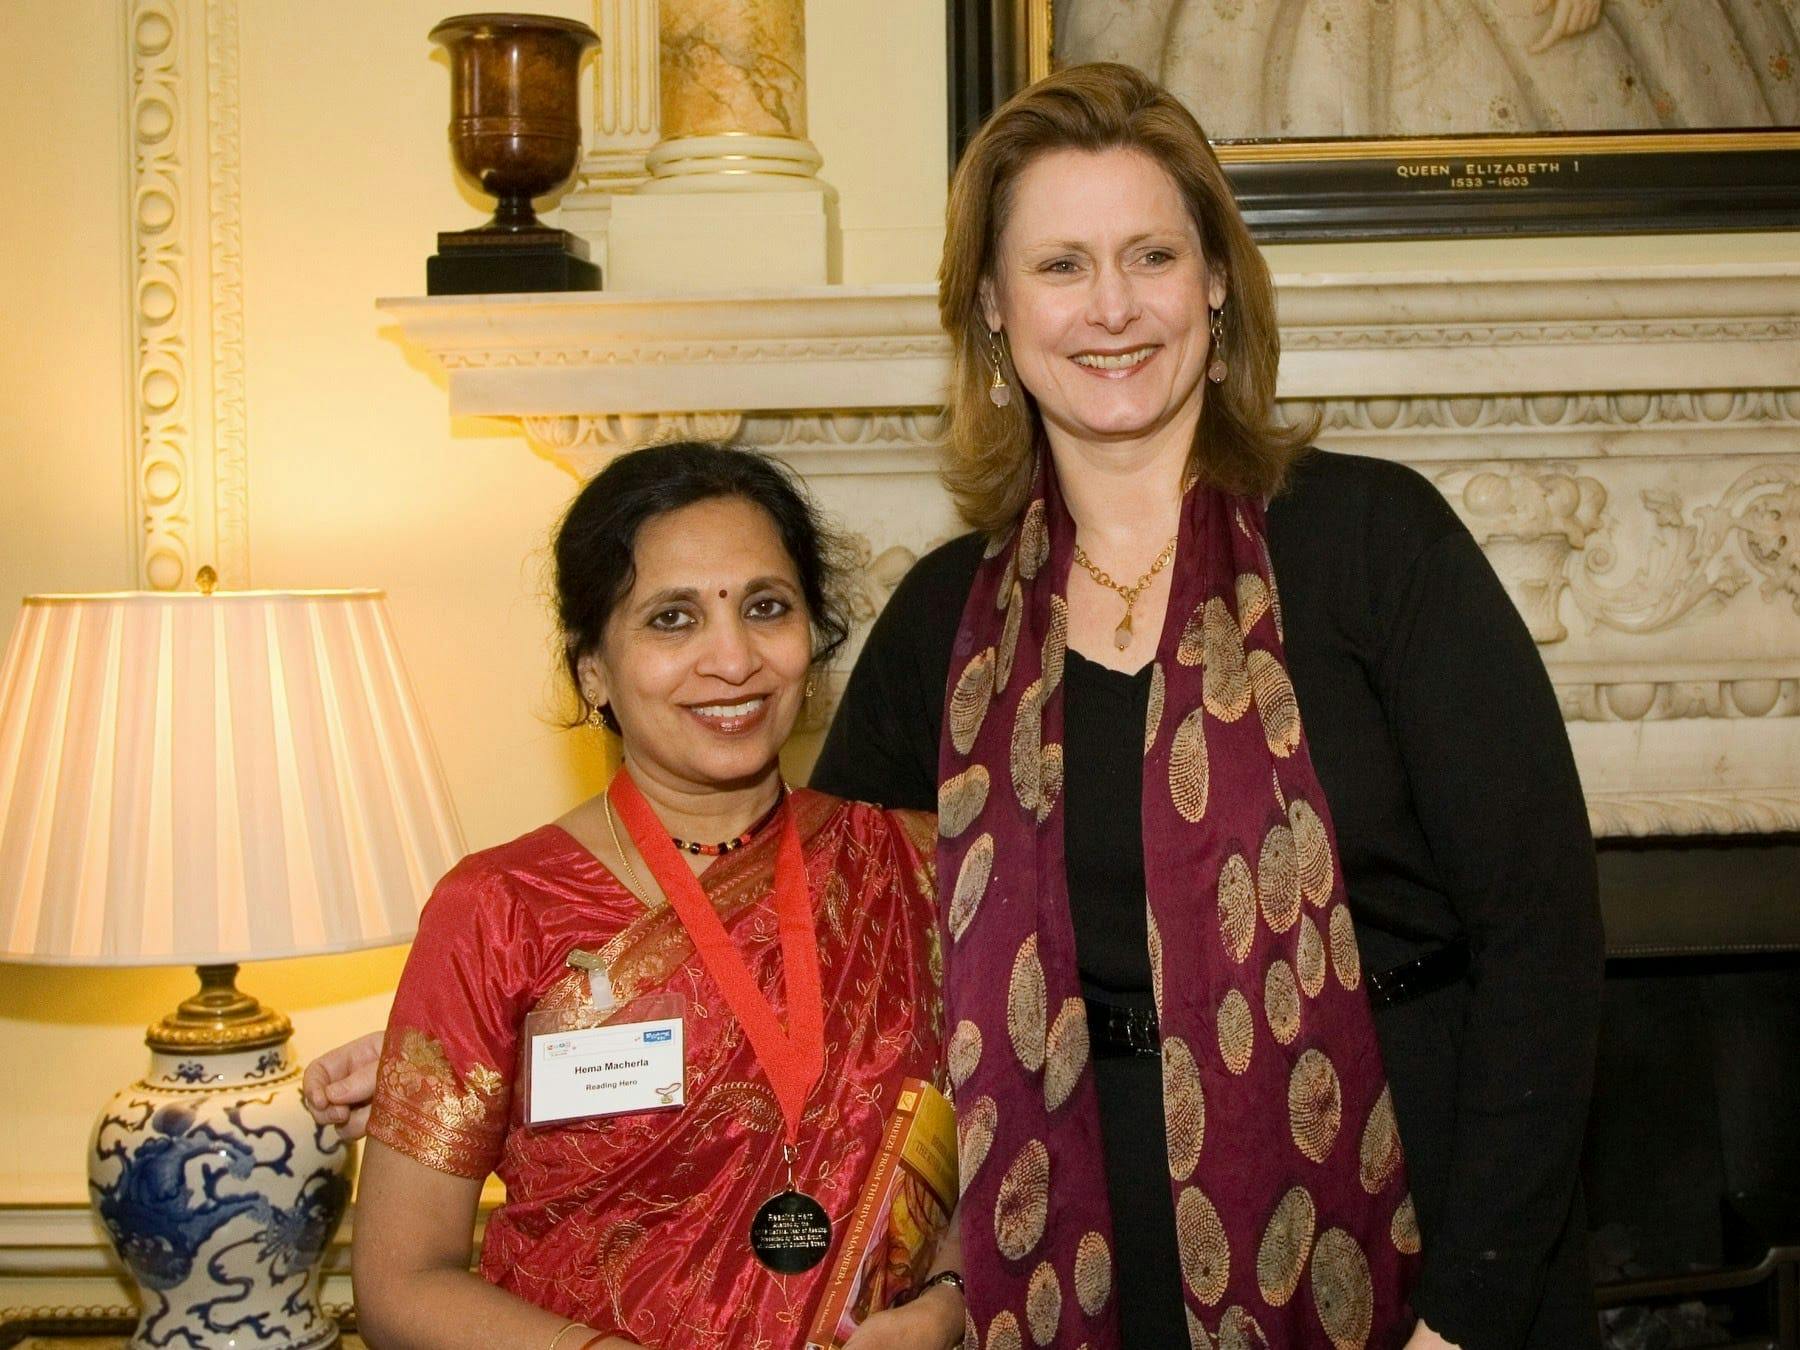 Receiving the Reading Hero Award, from the Prime Minister's wife, Mrs. Sarah Brown, at 10 Downing Street in 2009